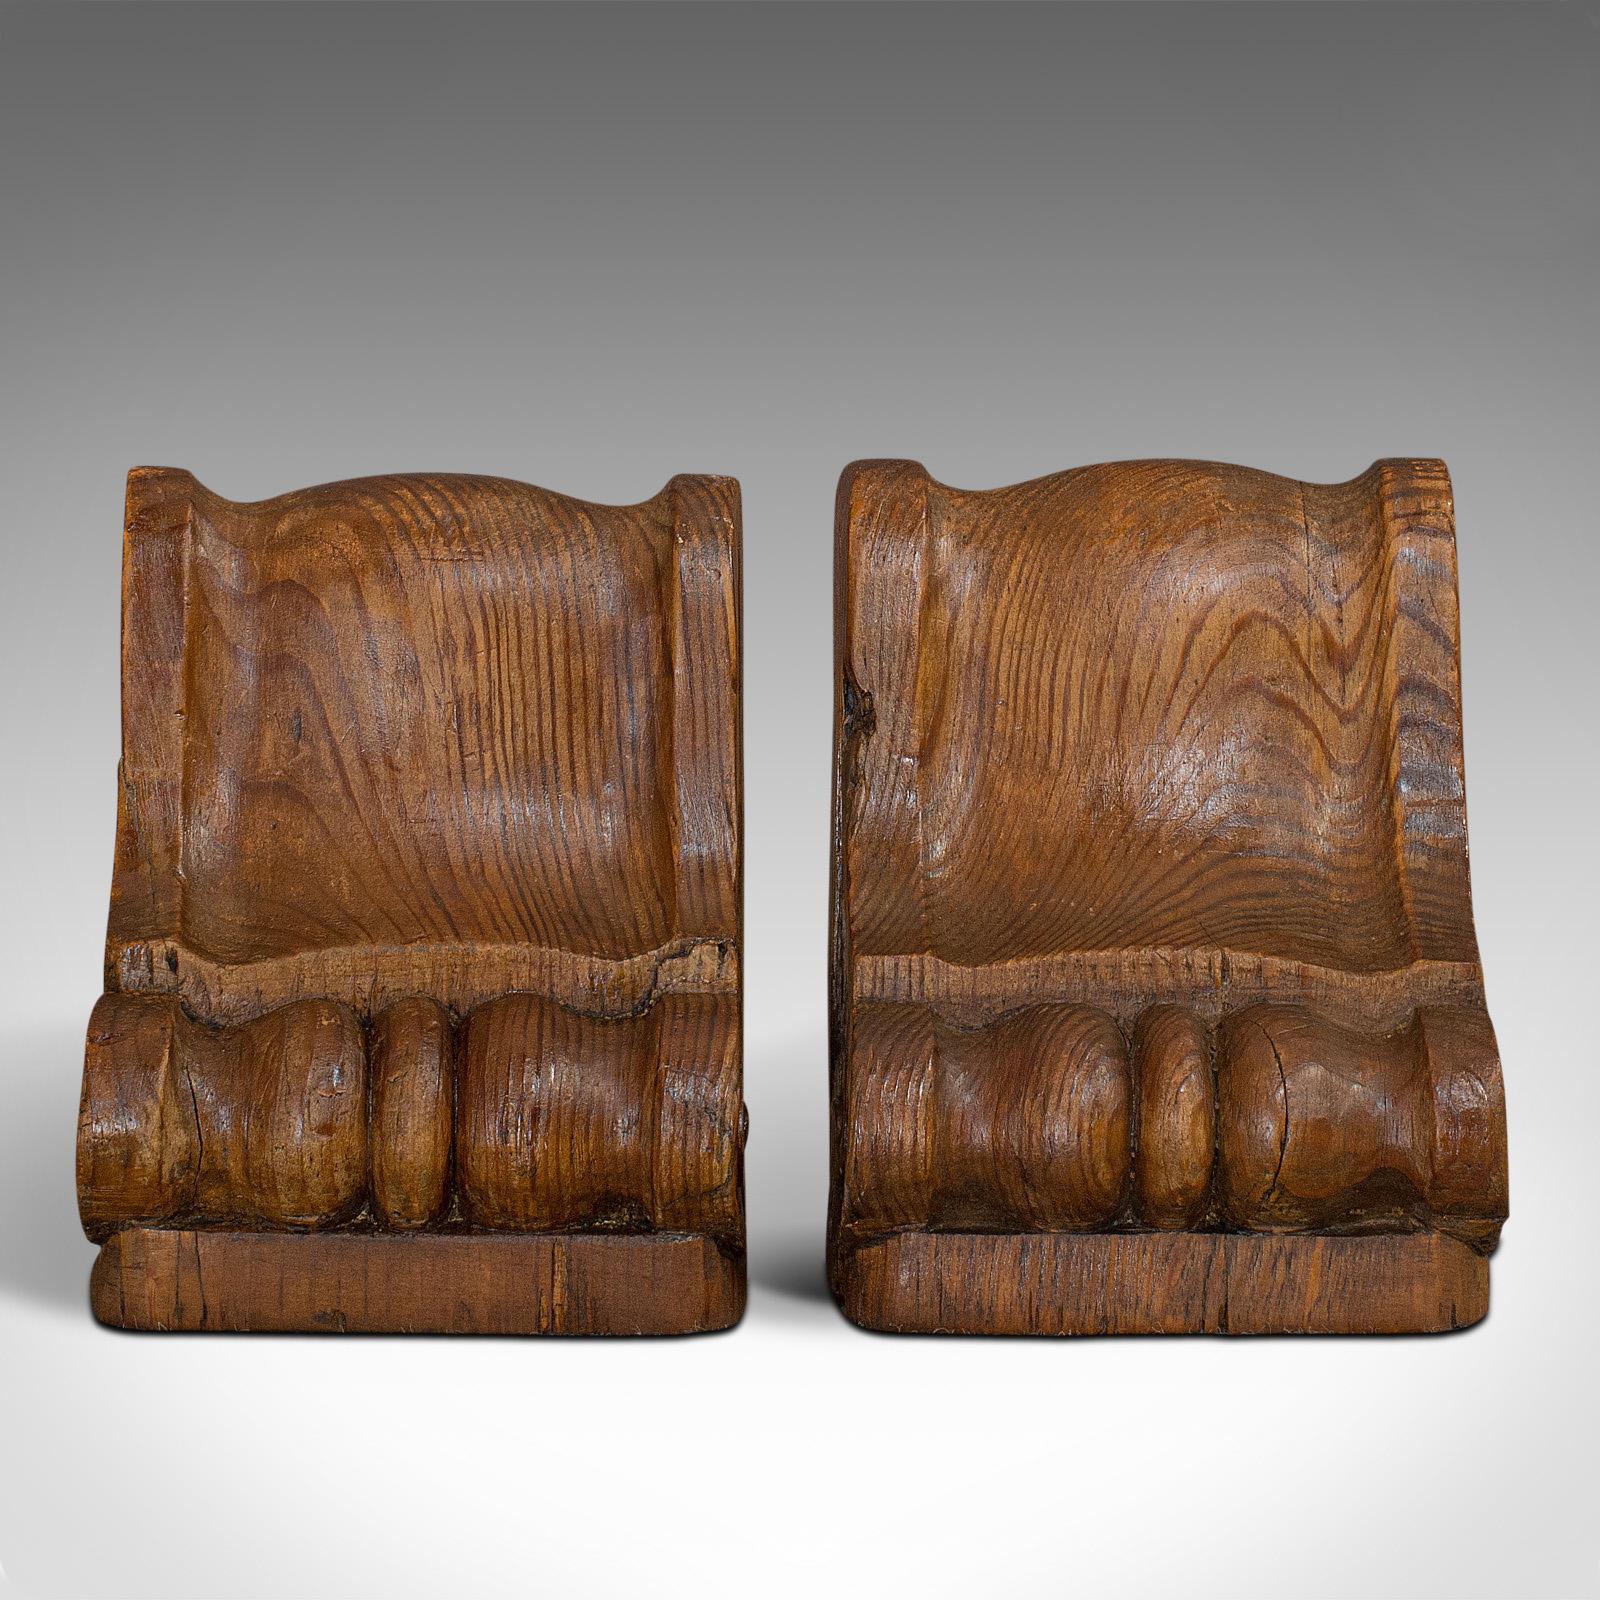 This is a pair of vintage bookends. An English, pitch pine corbel crafted from timber taken from Wren's Church in London, dating to the 20th century.

Antique timber repurposed into handy bookends
Displays a desirable aged patina
Pitch pine